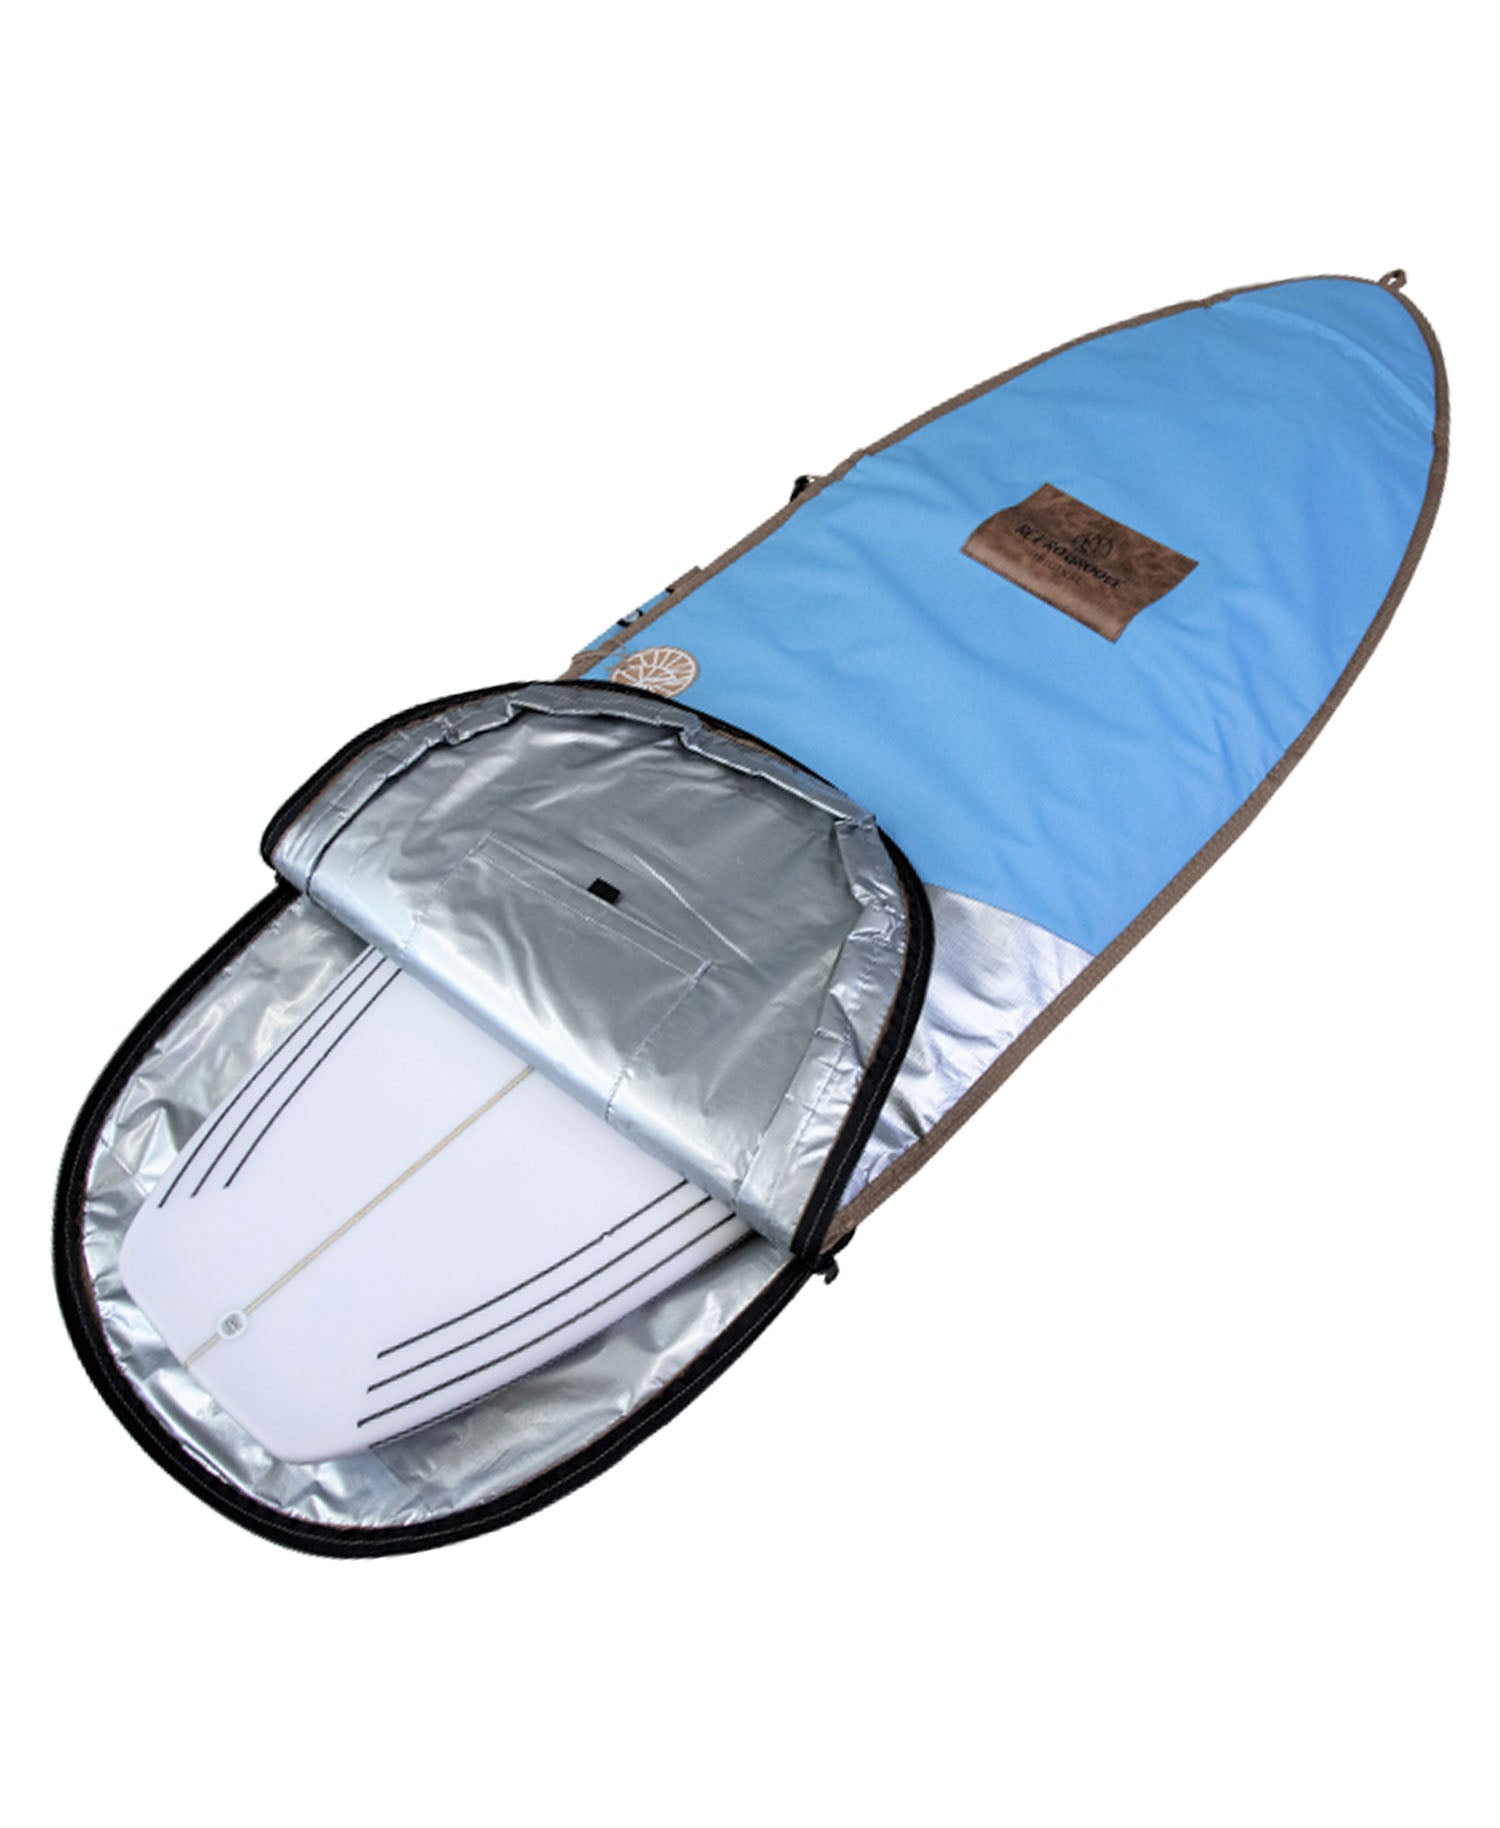 RETRO GROOVE 'NOMAD' SURFBOARD COVER